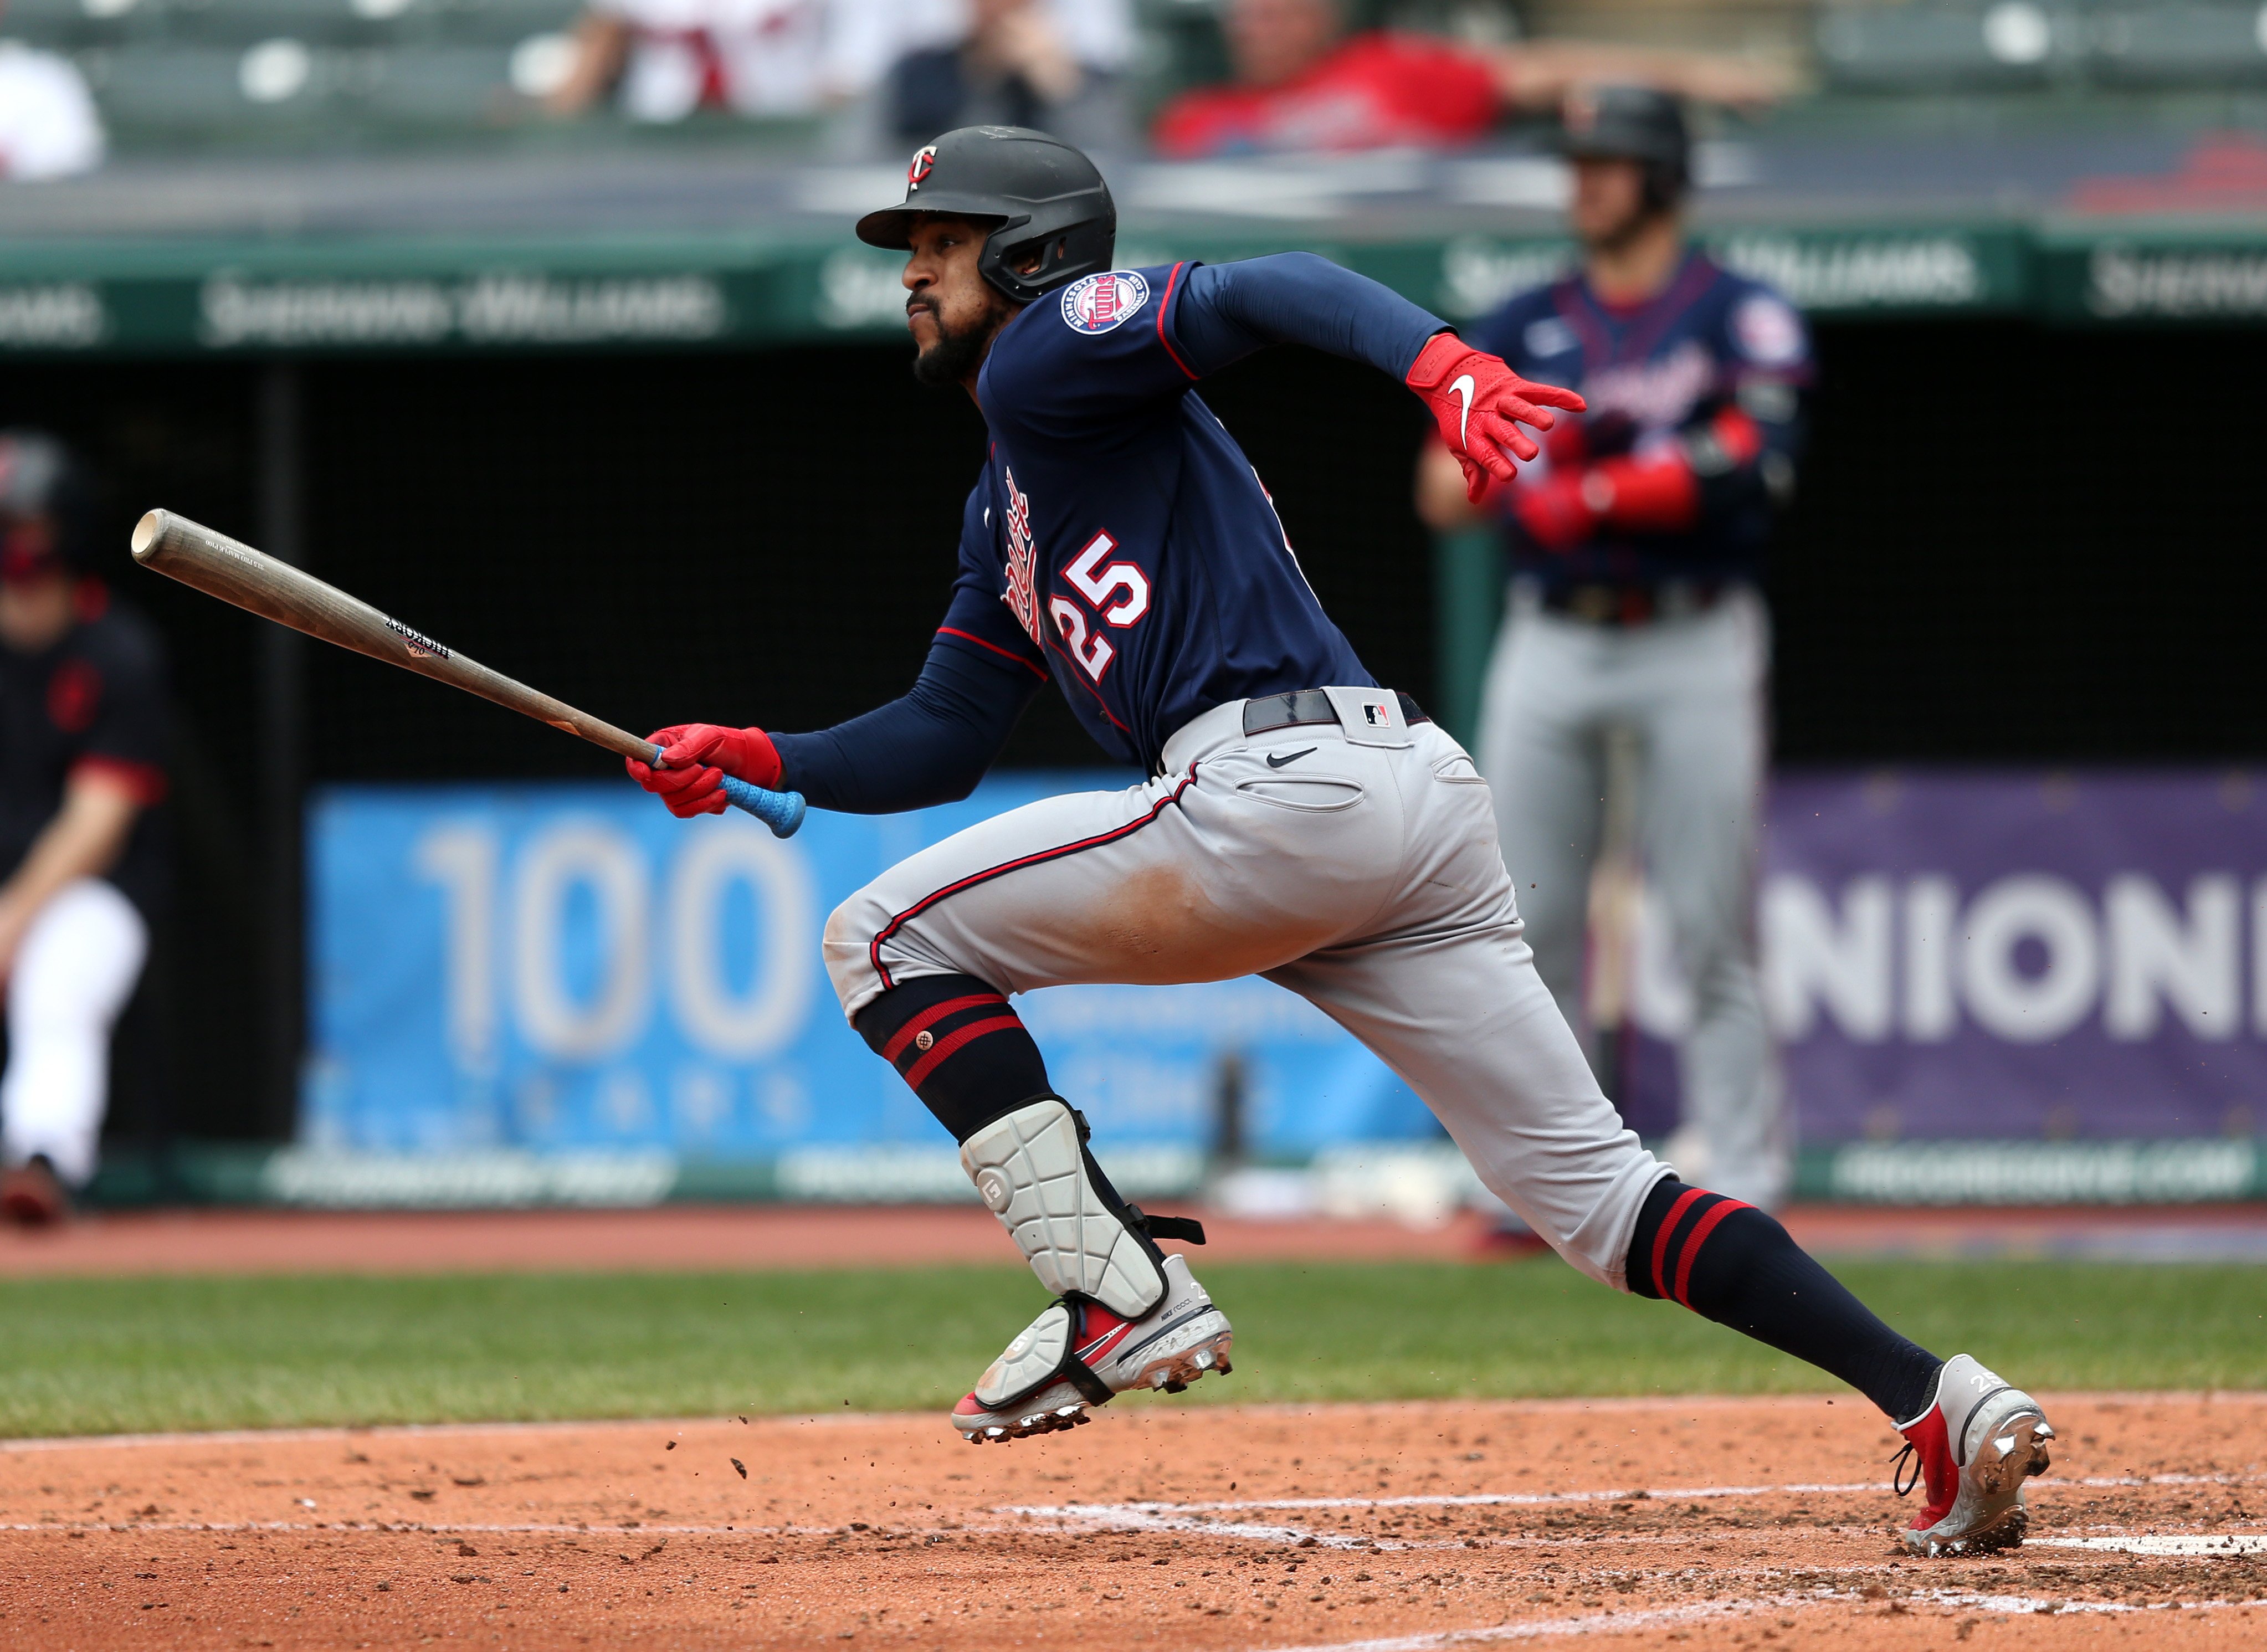 Reflections on Byron Buxton's Debut - Twins - Twins Daily